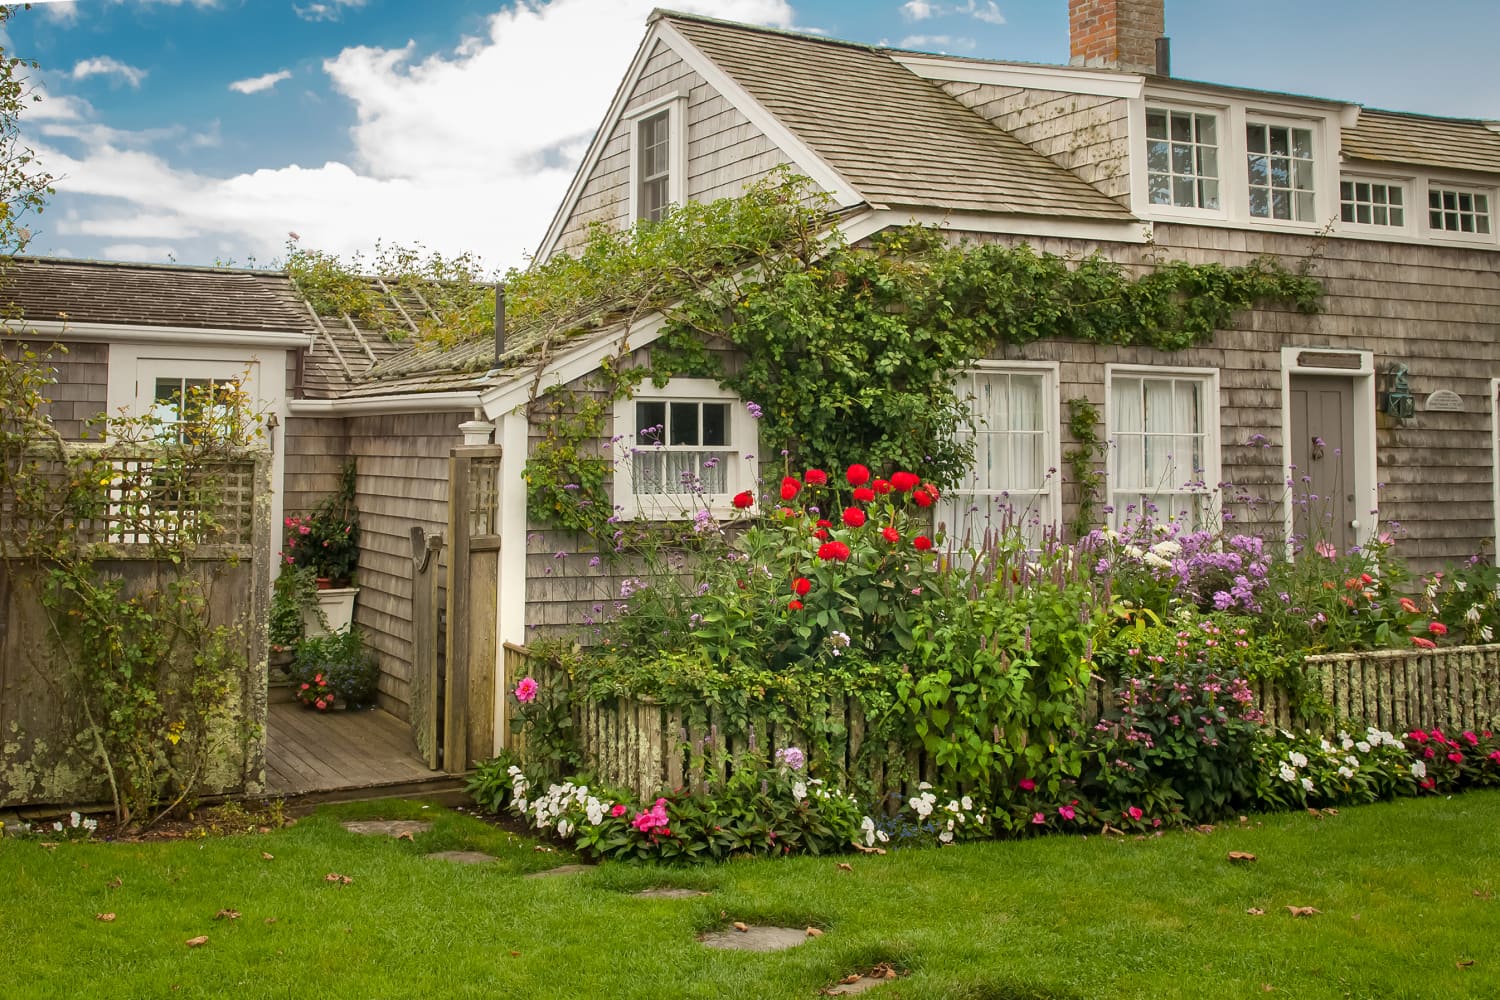 QnA VBage The First Thing You Should Do in Your Yard for Spring, According to the Pros